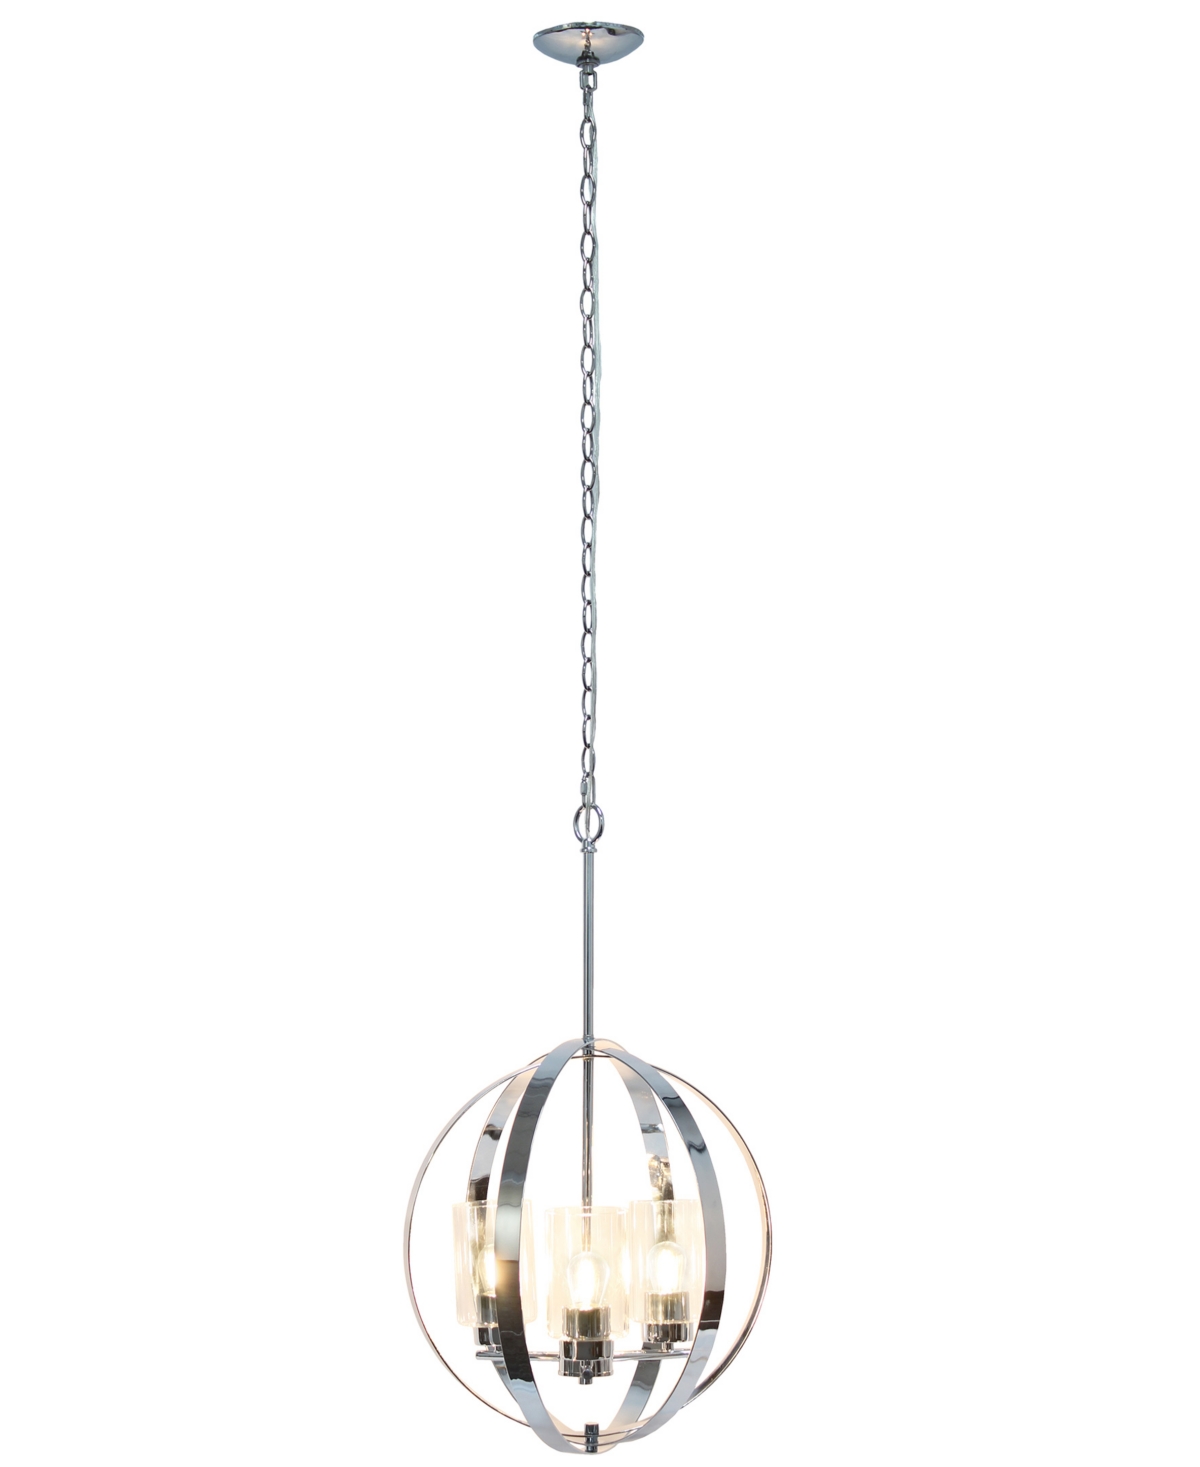 All The Rages 3-light 18" Adjustable Industrial Globe Hanging Metal And Clear Glass Ceiling Pendant In Chrome